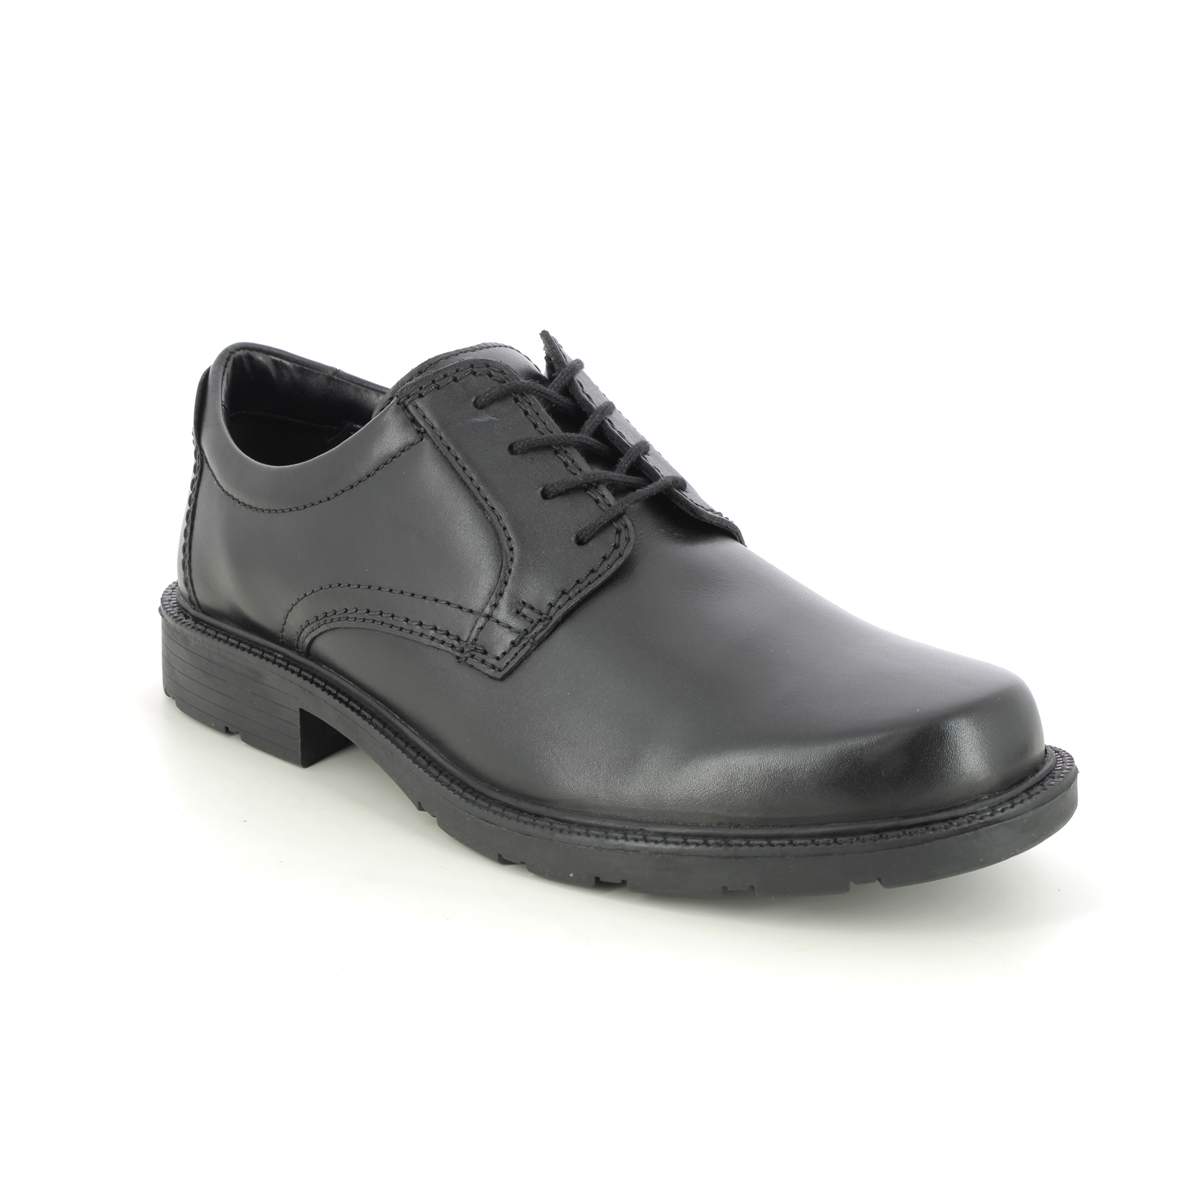 Clarks Kerton Lace Black Leather Mens Formal Shoes 656058H In Size 7 In Plain Black Leather H Width Fitting Extra Wide